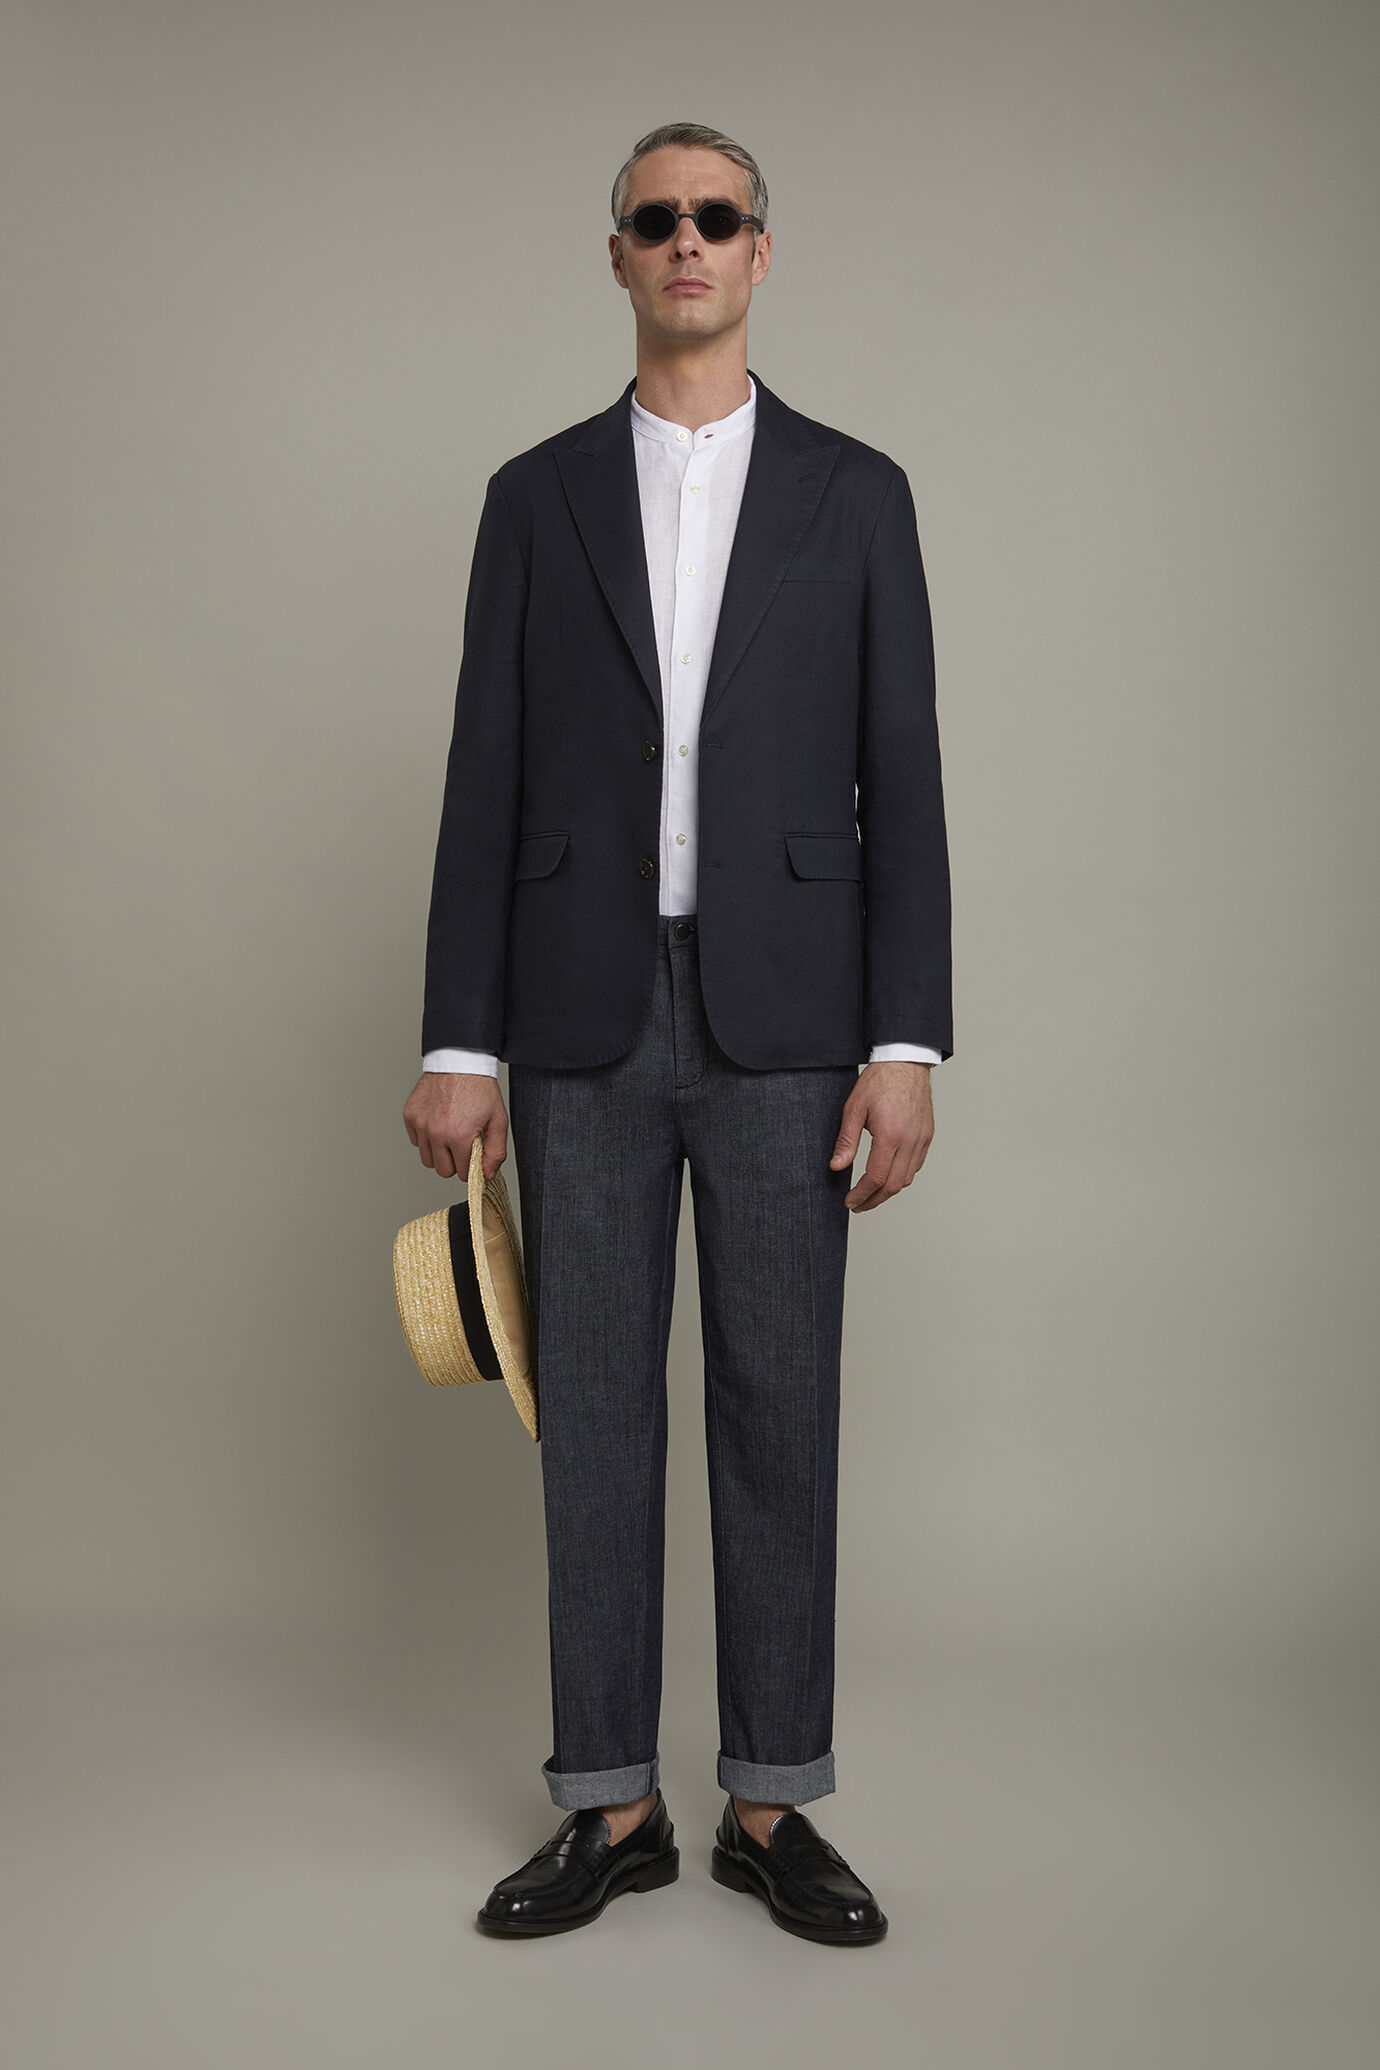 Men's single-breasted unlined linen and cotton blazer with regular fit lapels